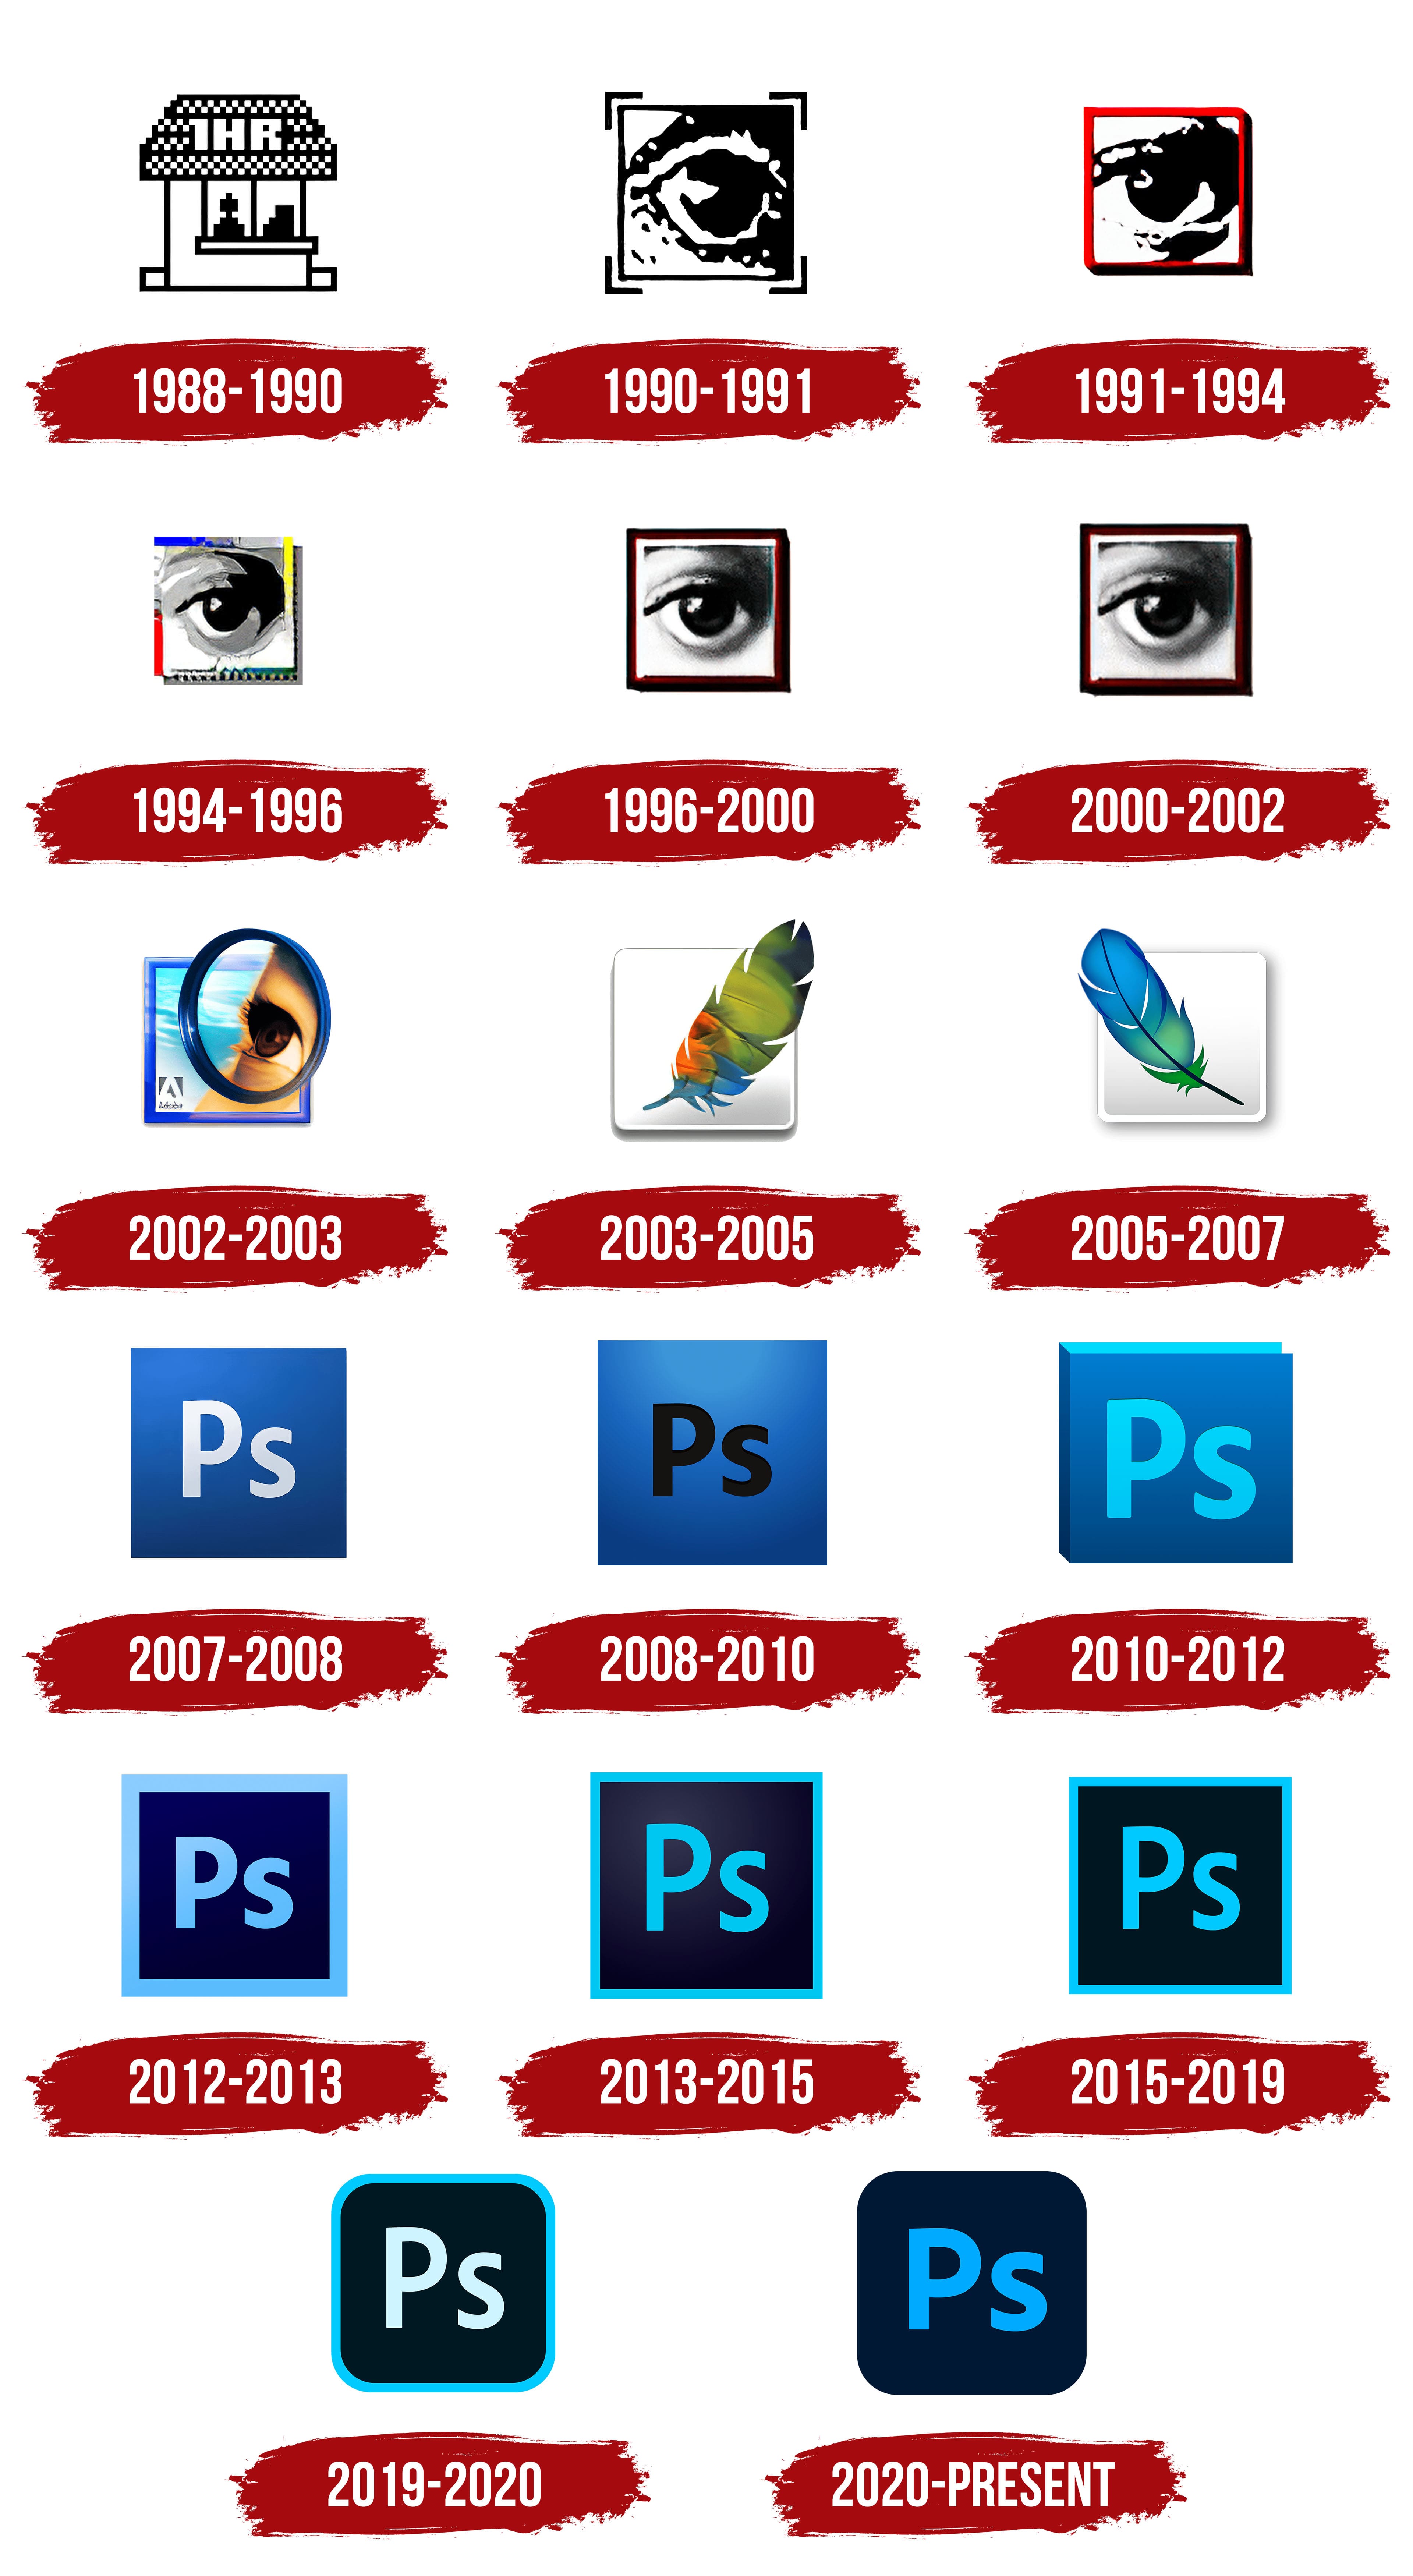 Photoshop Logo, symbol, meaning, history, PNG, brand